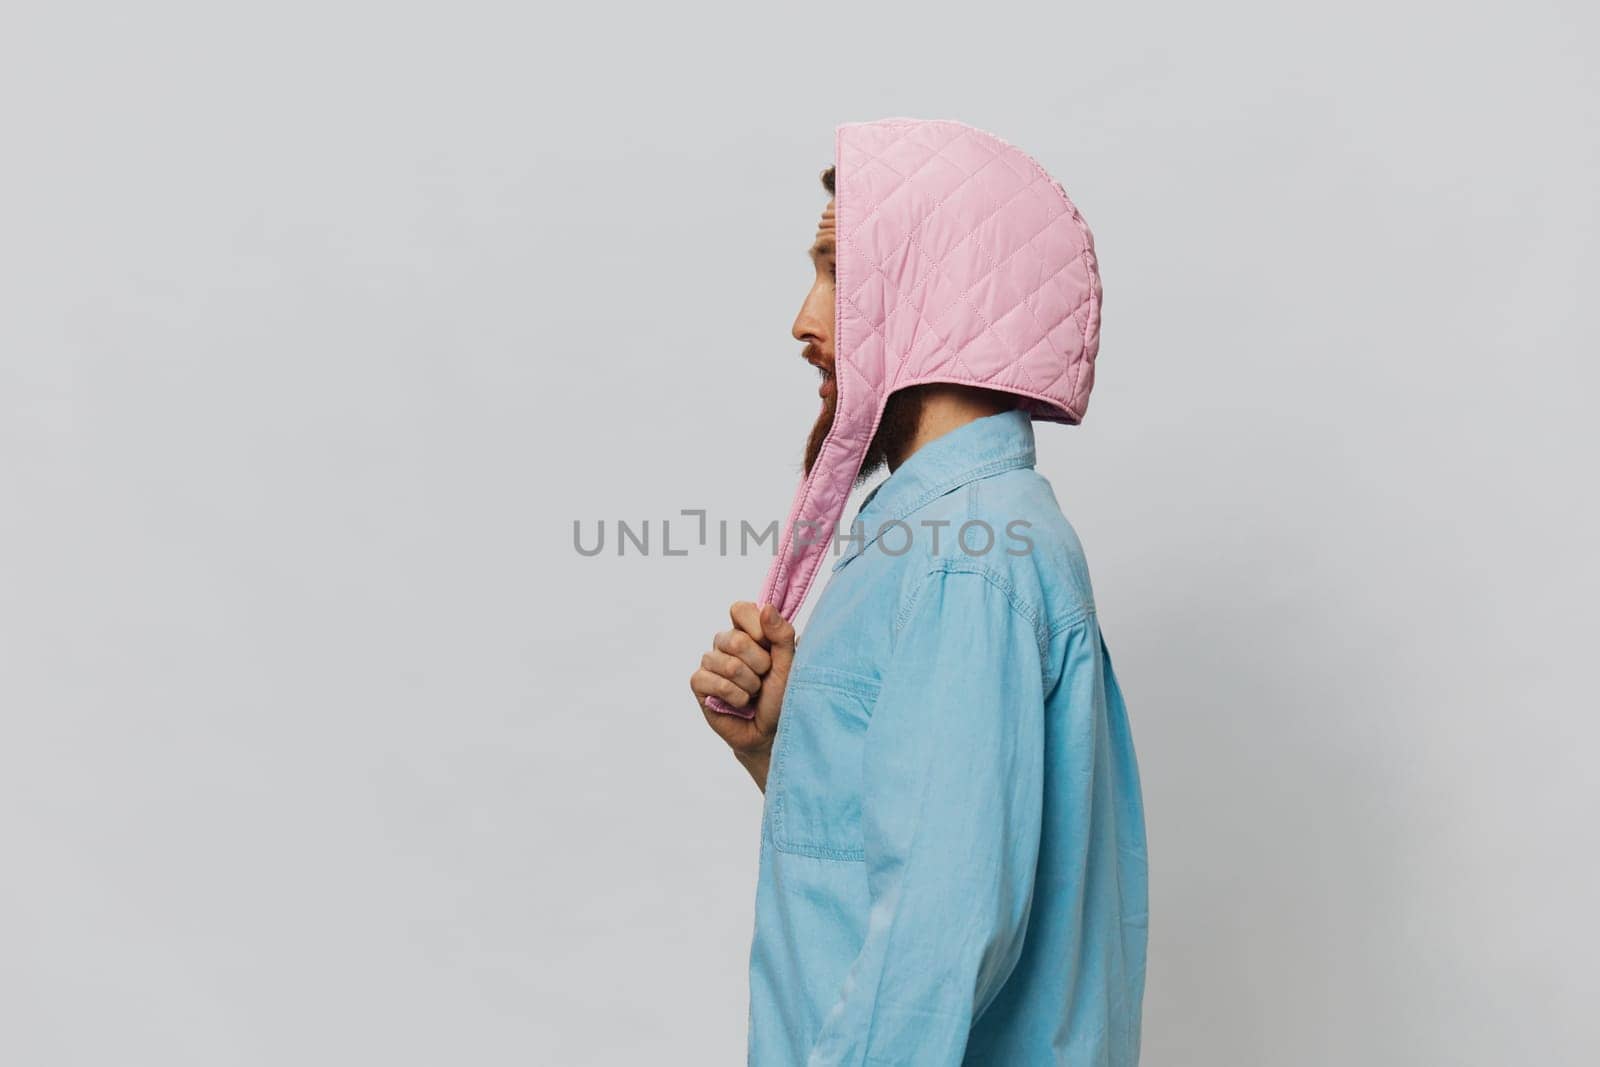 Funny man in a pink hat portrait on a light gray background. Smile and positive emotions. High quality photo